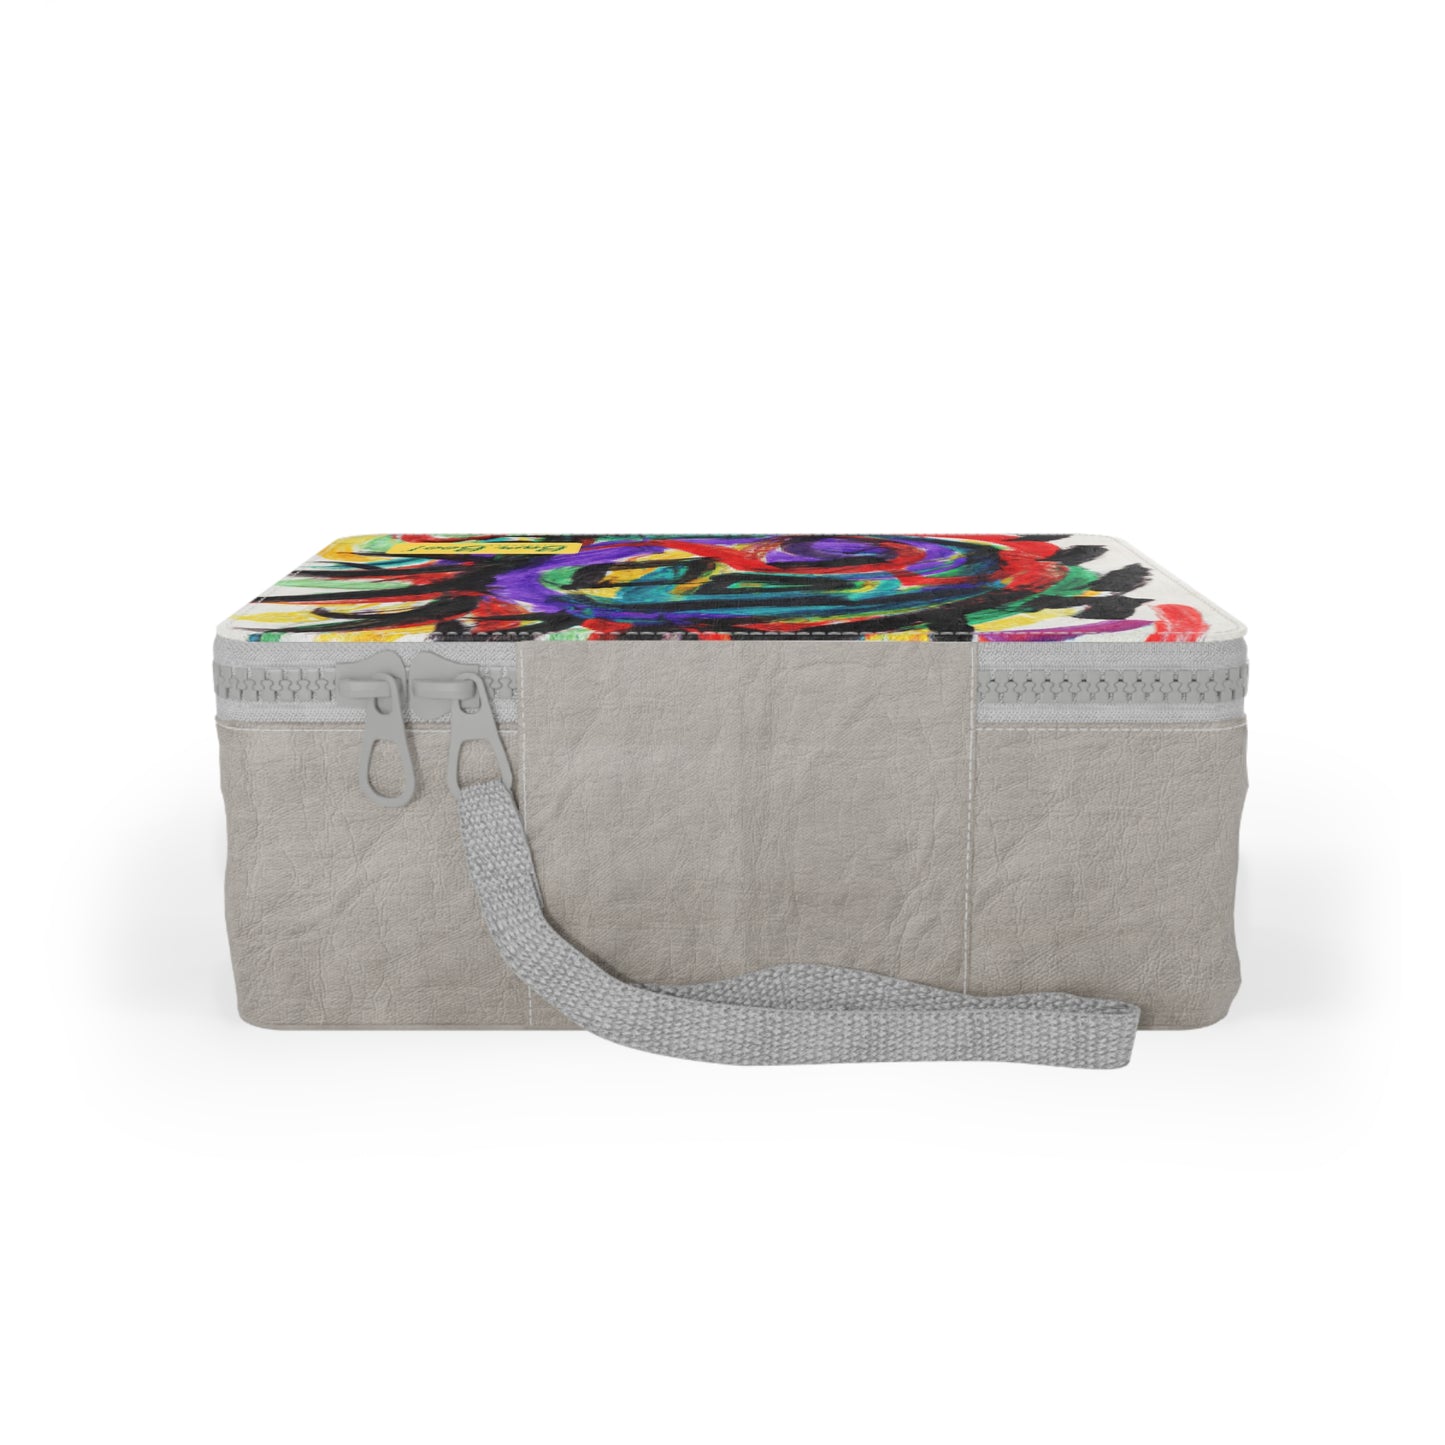 "In Motion: Exploring Transformation through Abstraction" - Bam Boo! Lifestyle Eco-friendly Paper Lunch Bag